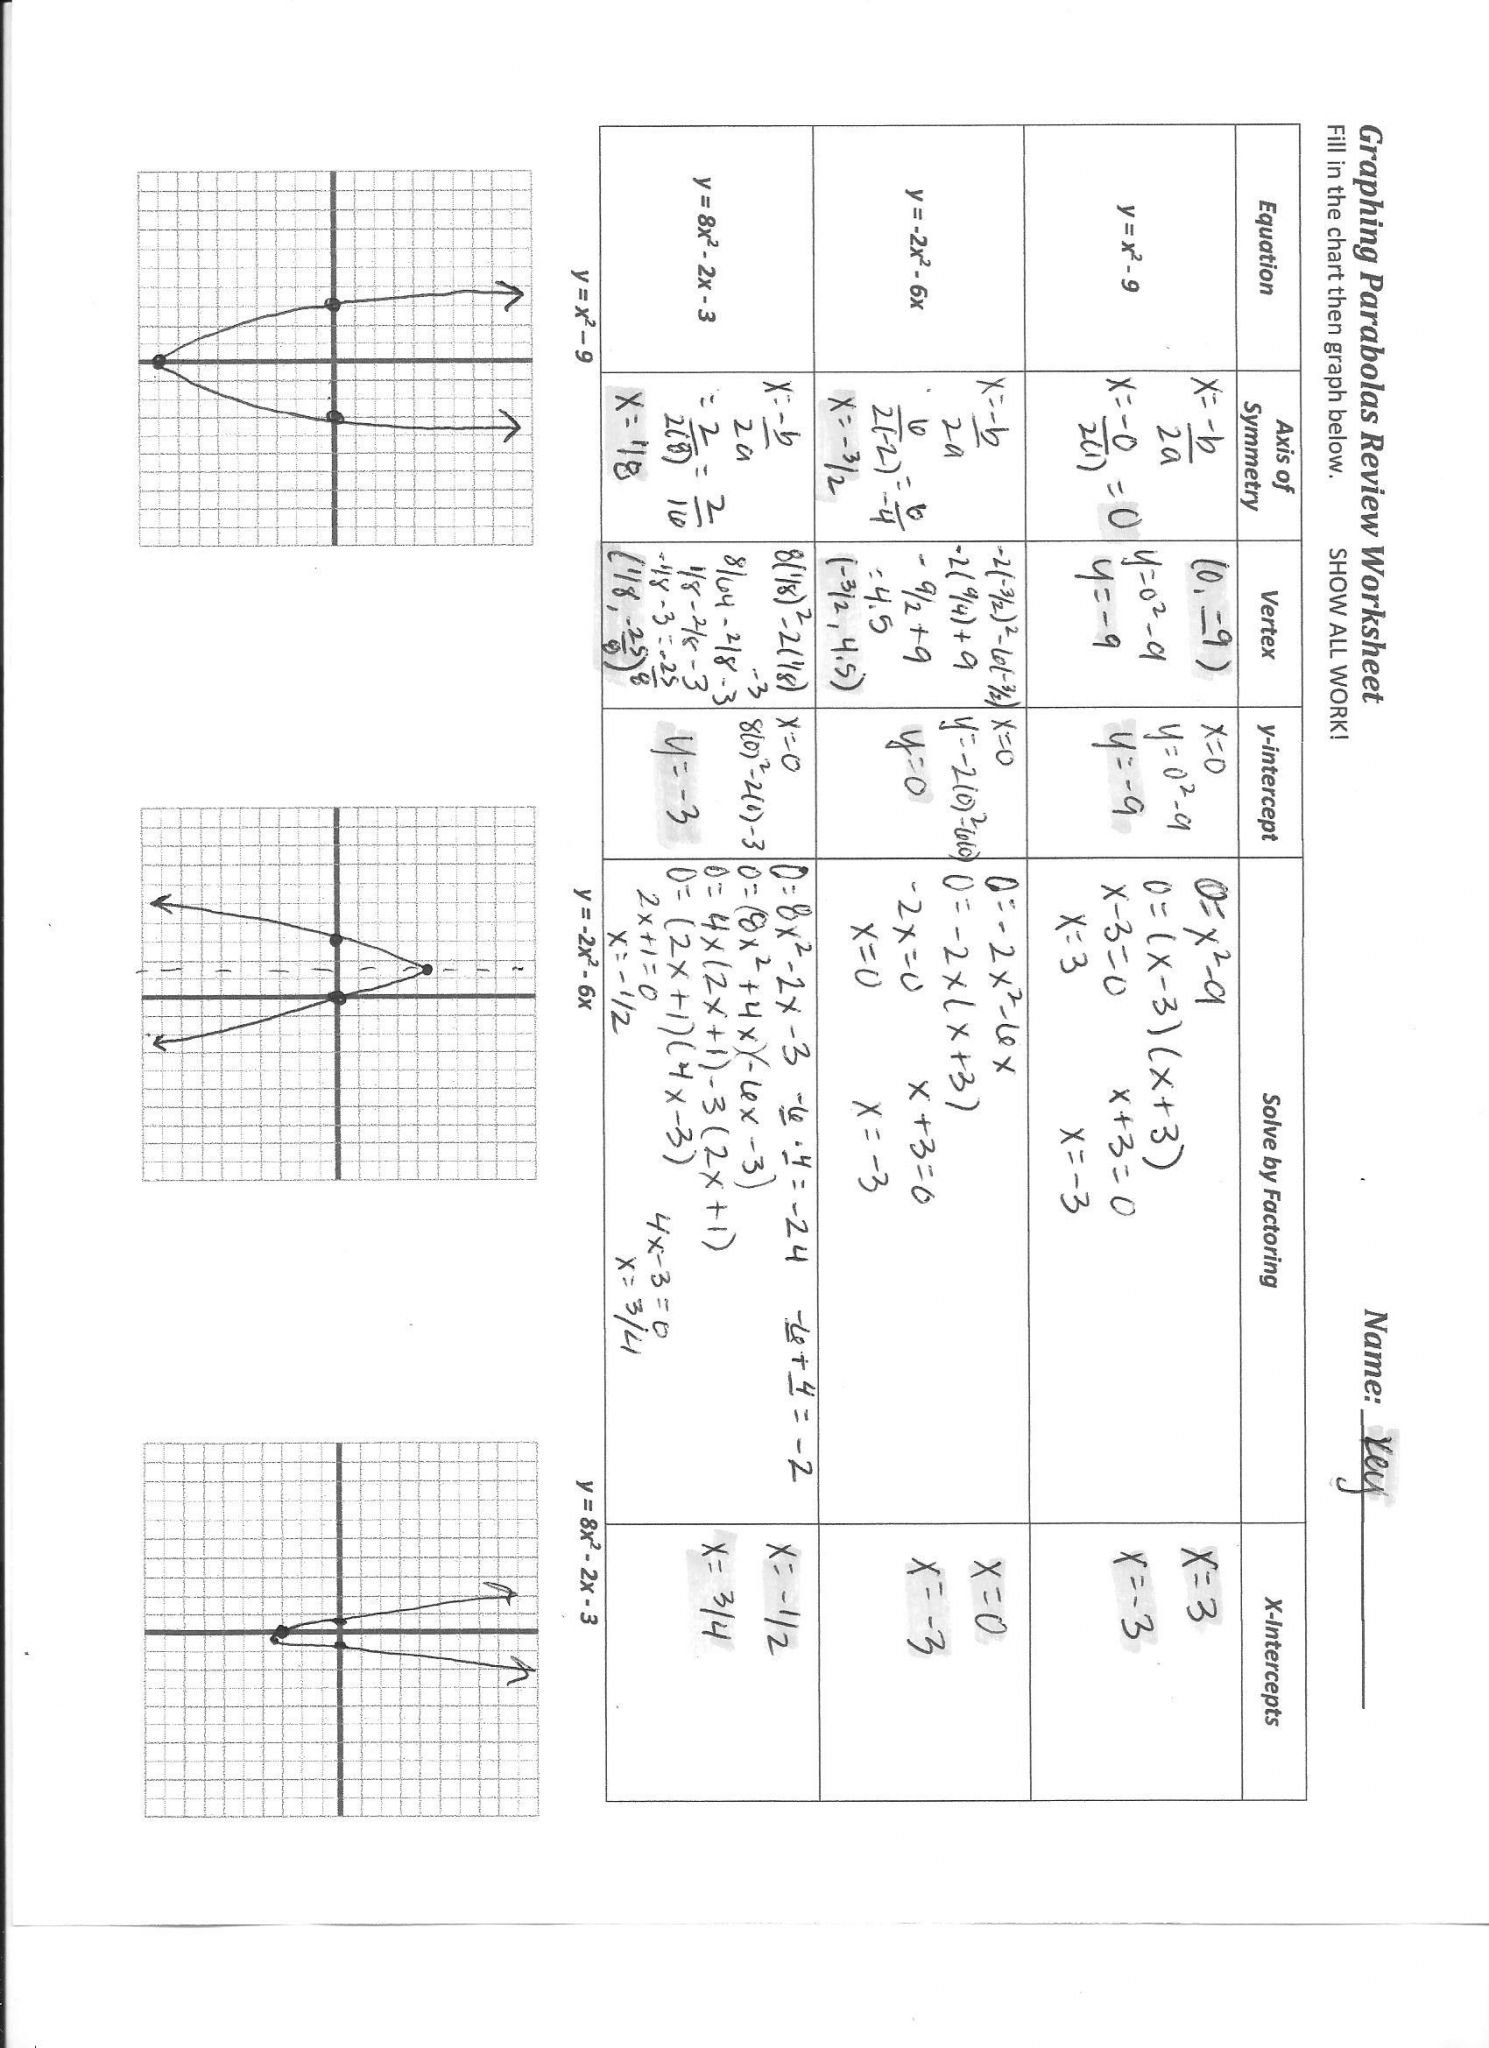 Graphing Quadratic Functions Worksheet Answer Key  Briefencounters For Function Table Worksheet Answer Key